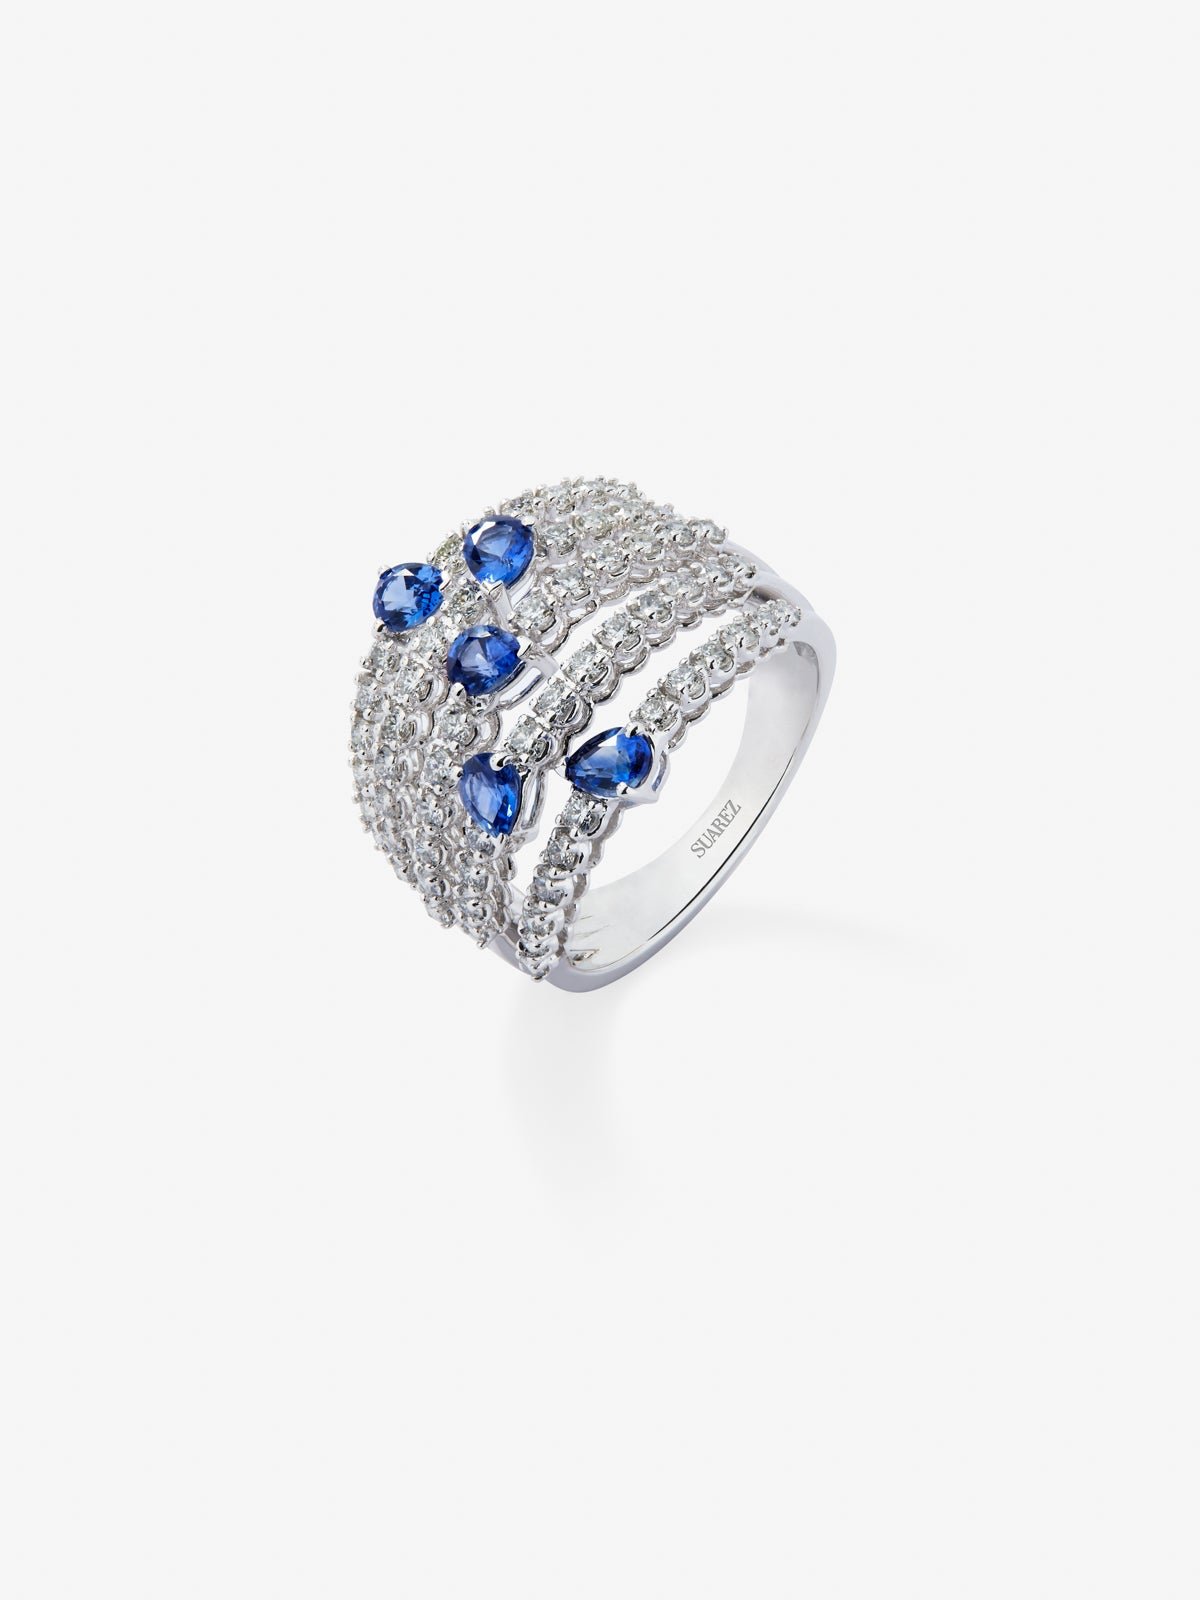 You and me ring in 18K white gold with 5 pear-cut blue sapphires with a total of 1.13 cts and 60 brilliant-cut diamonds with a total of 1 cts